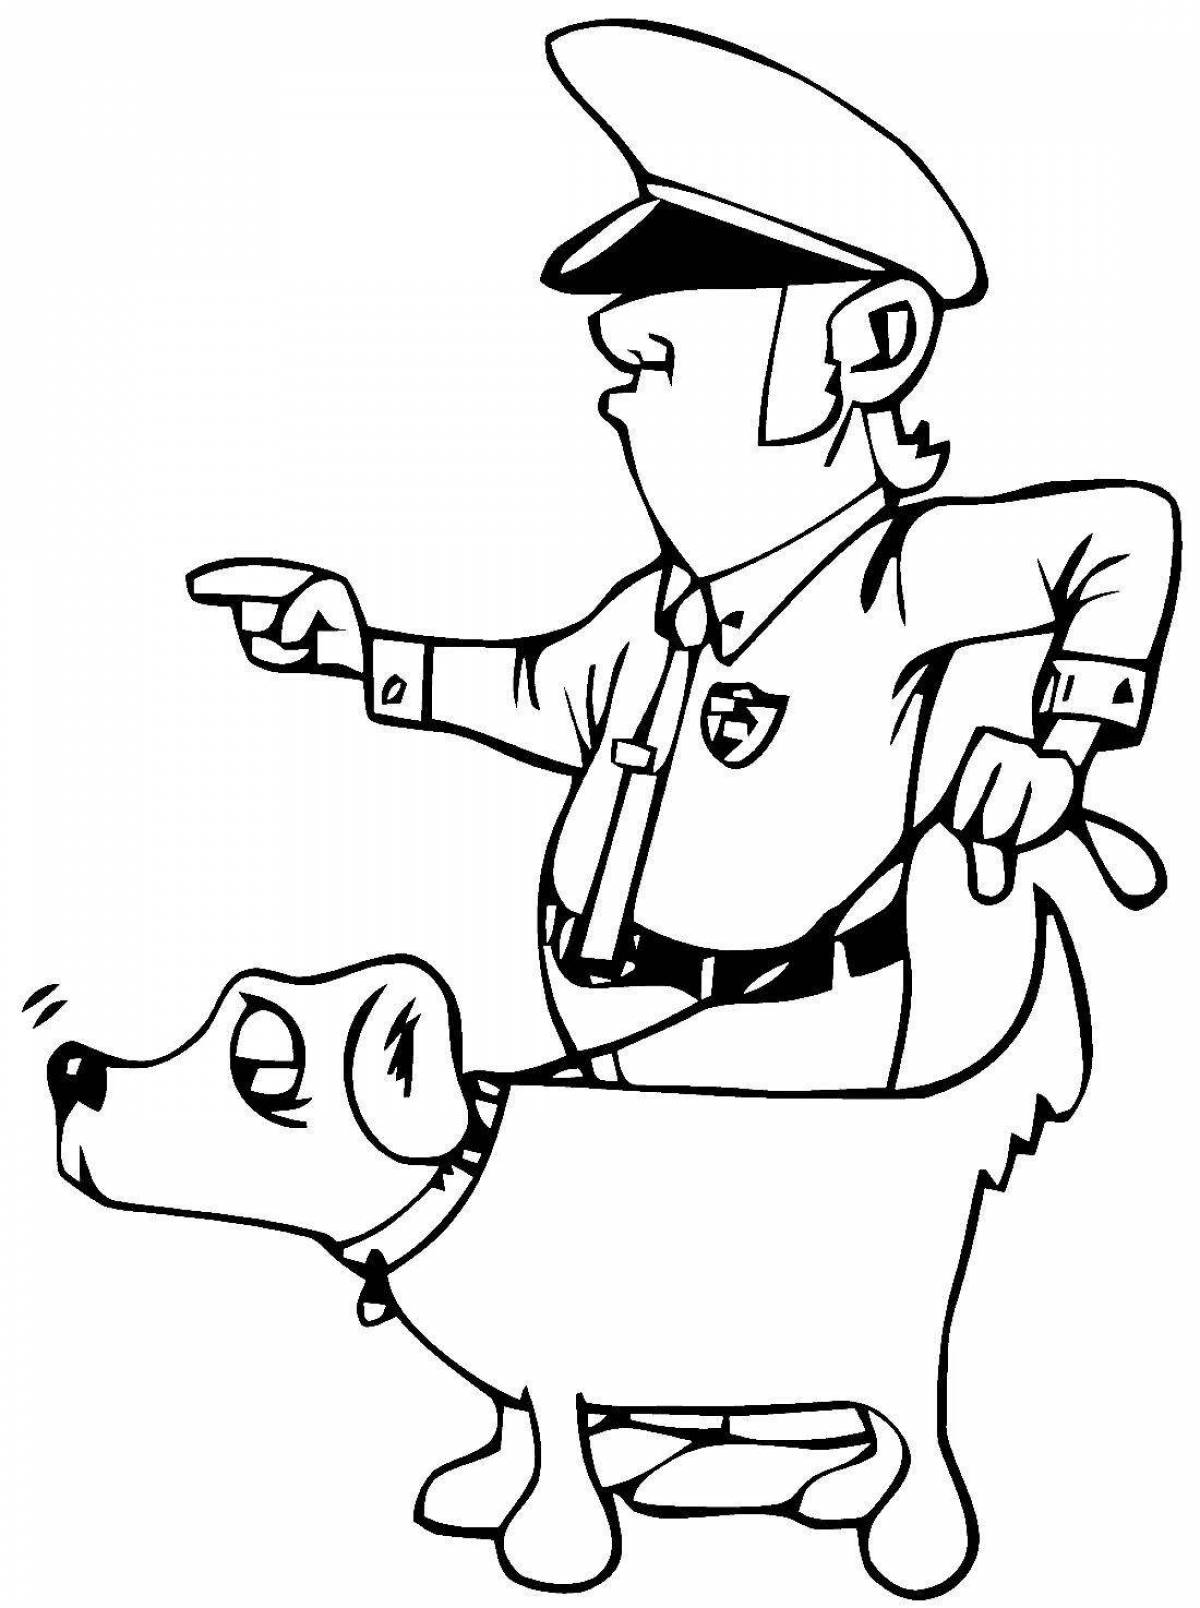 Coloring book outstanding policeman for kids